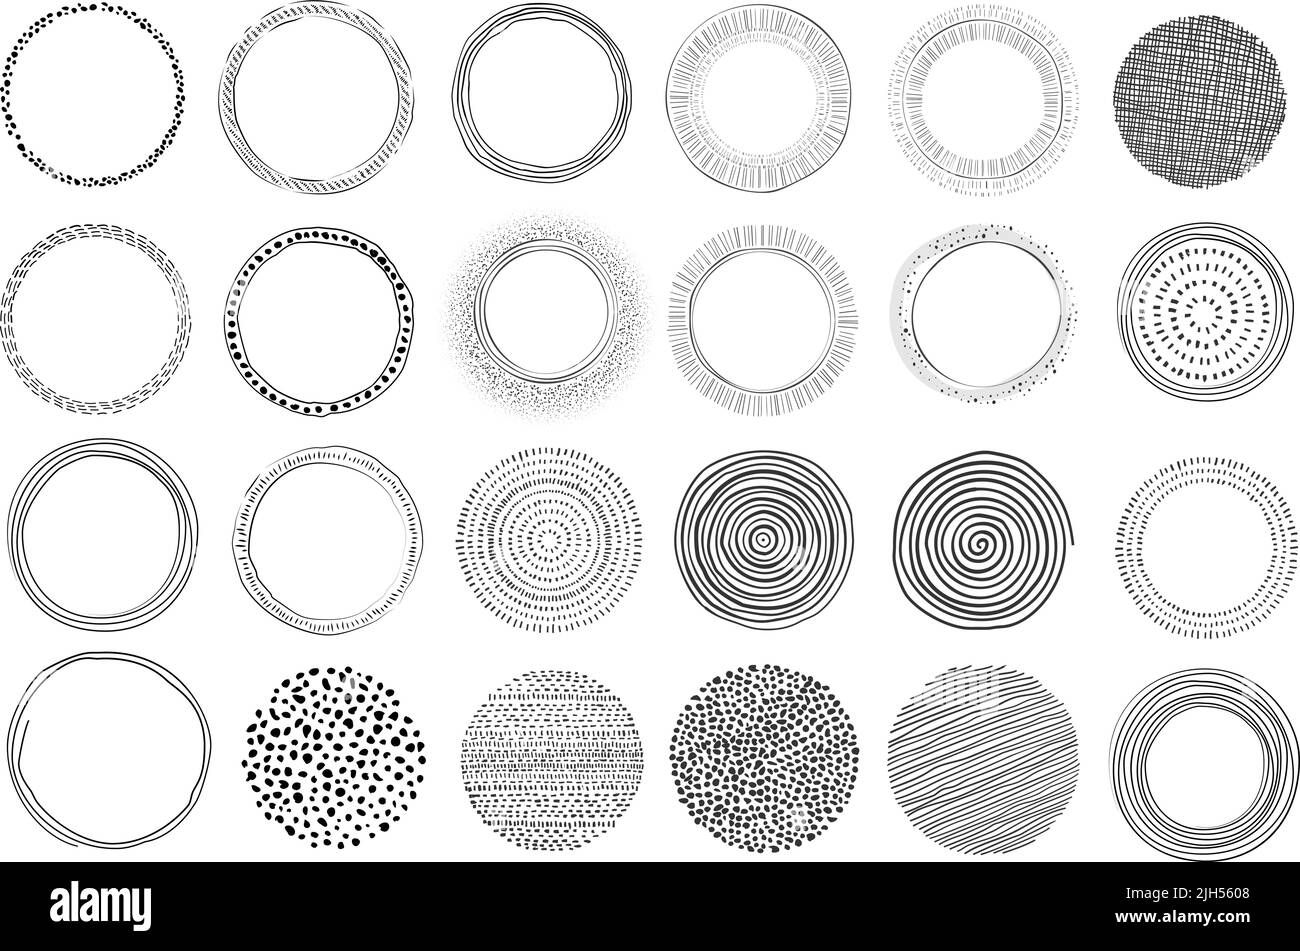 large collection of hand drawn circular graphic design elements, modern shapes isolated on white, vector illustration Stock Vector